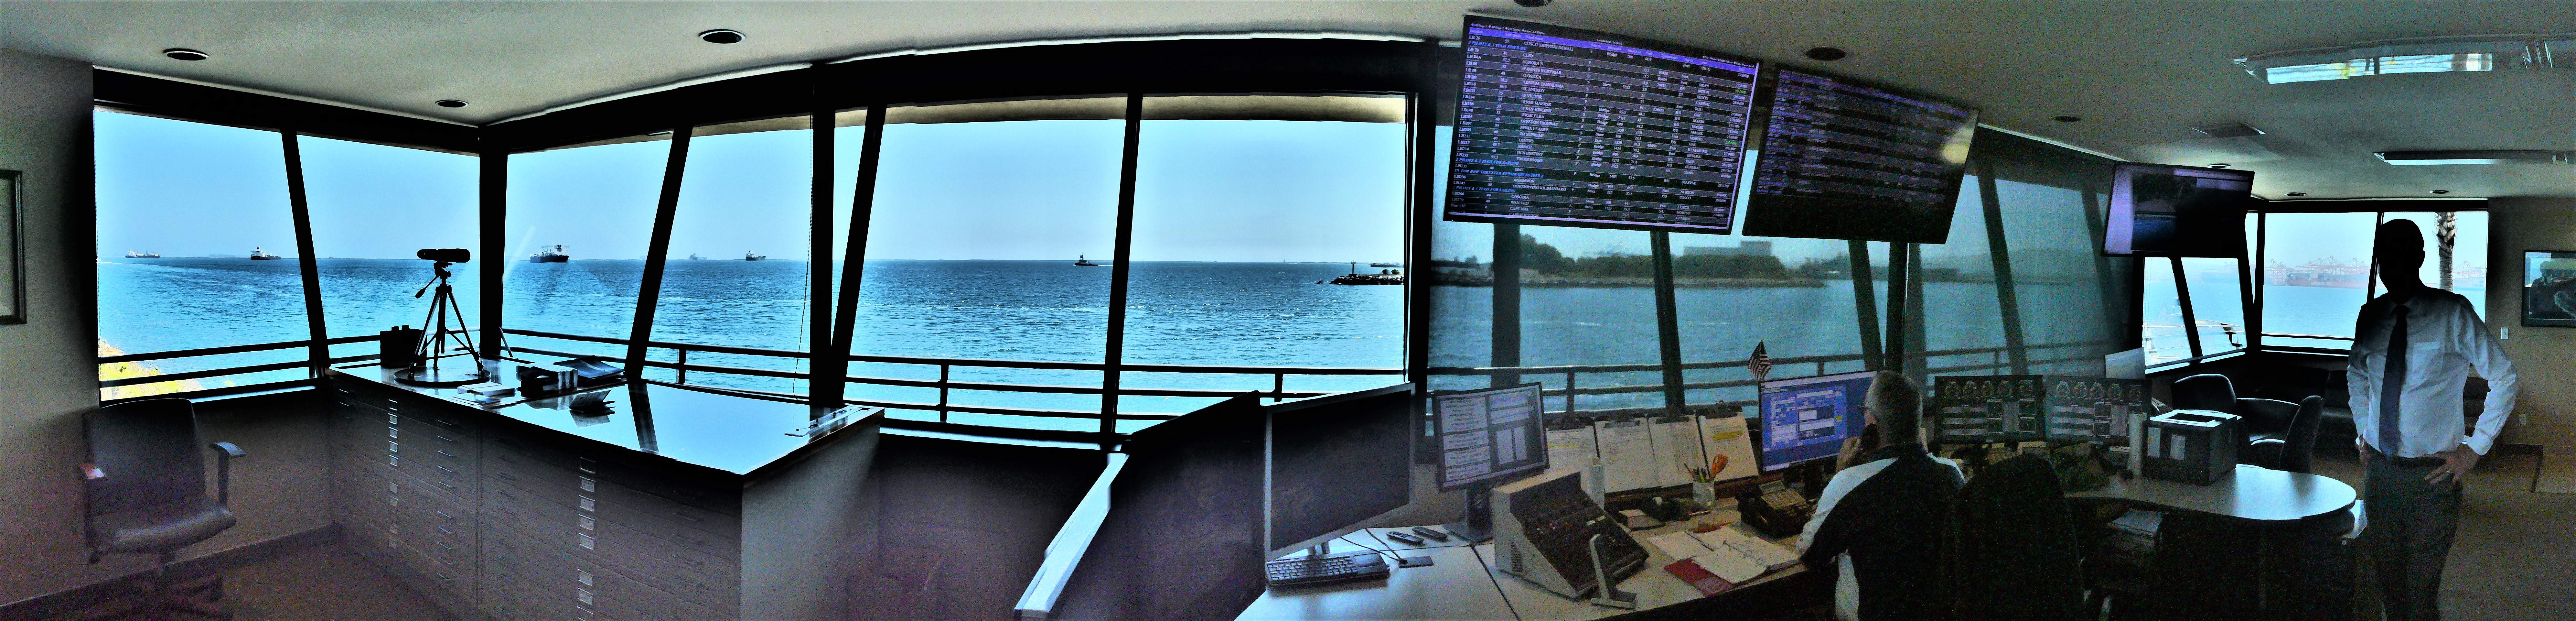 Wide view of the control room